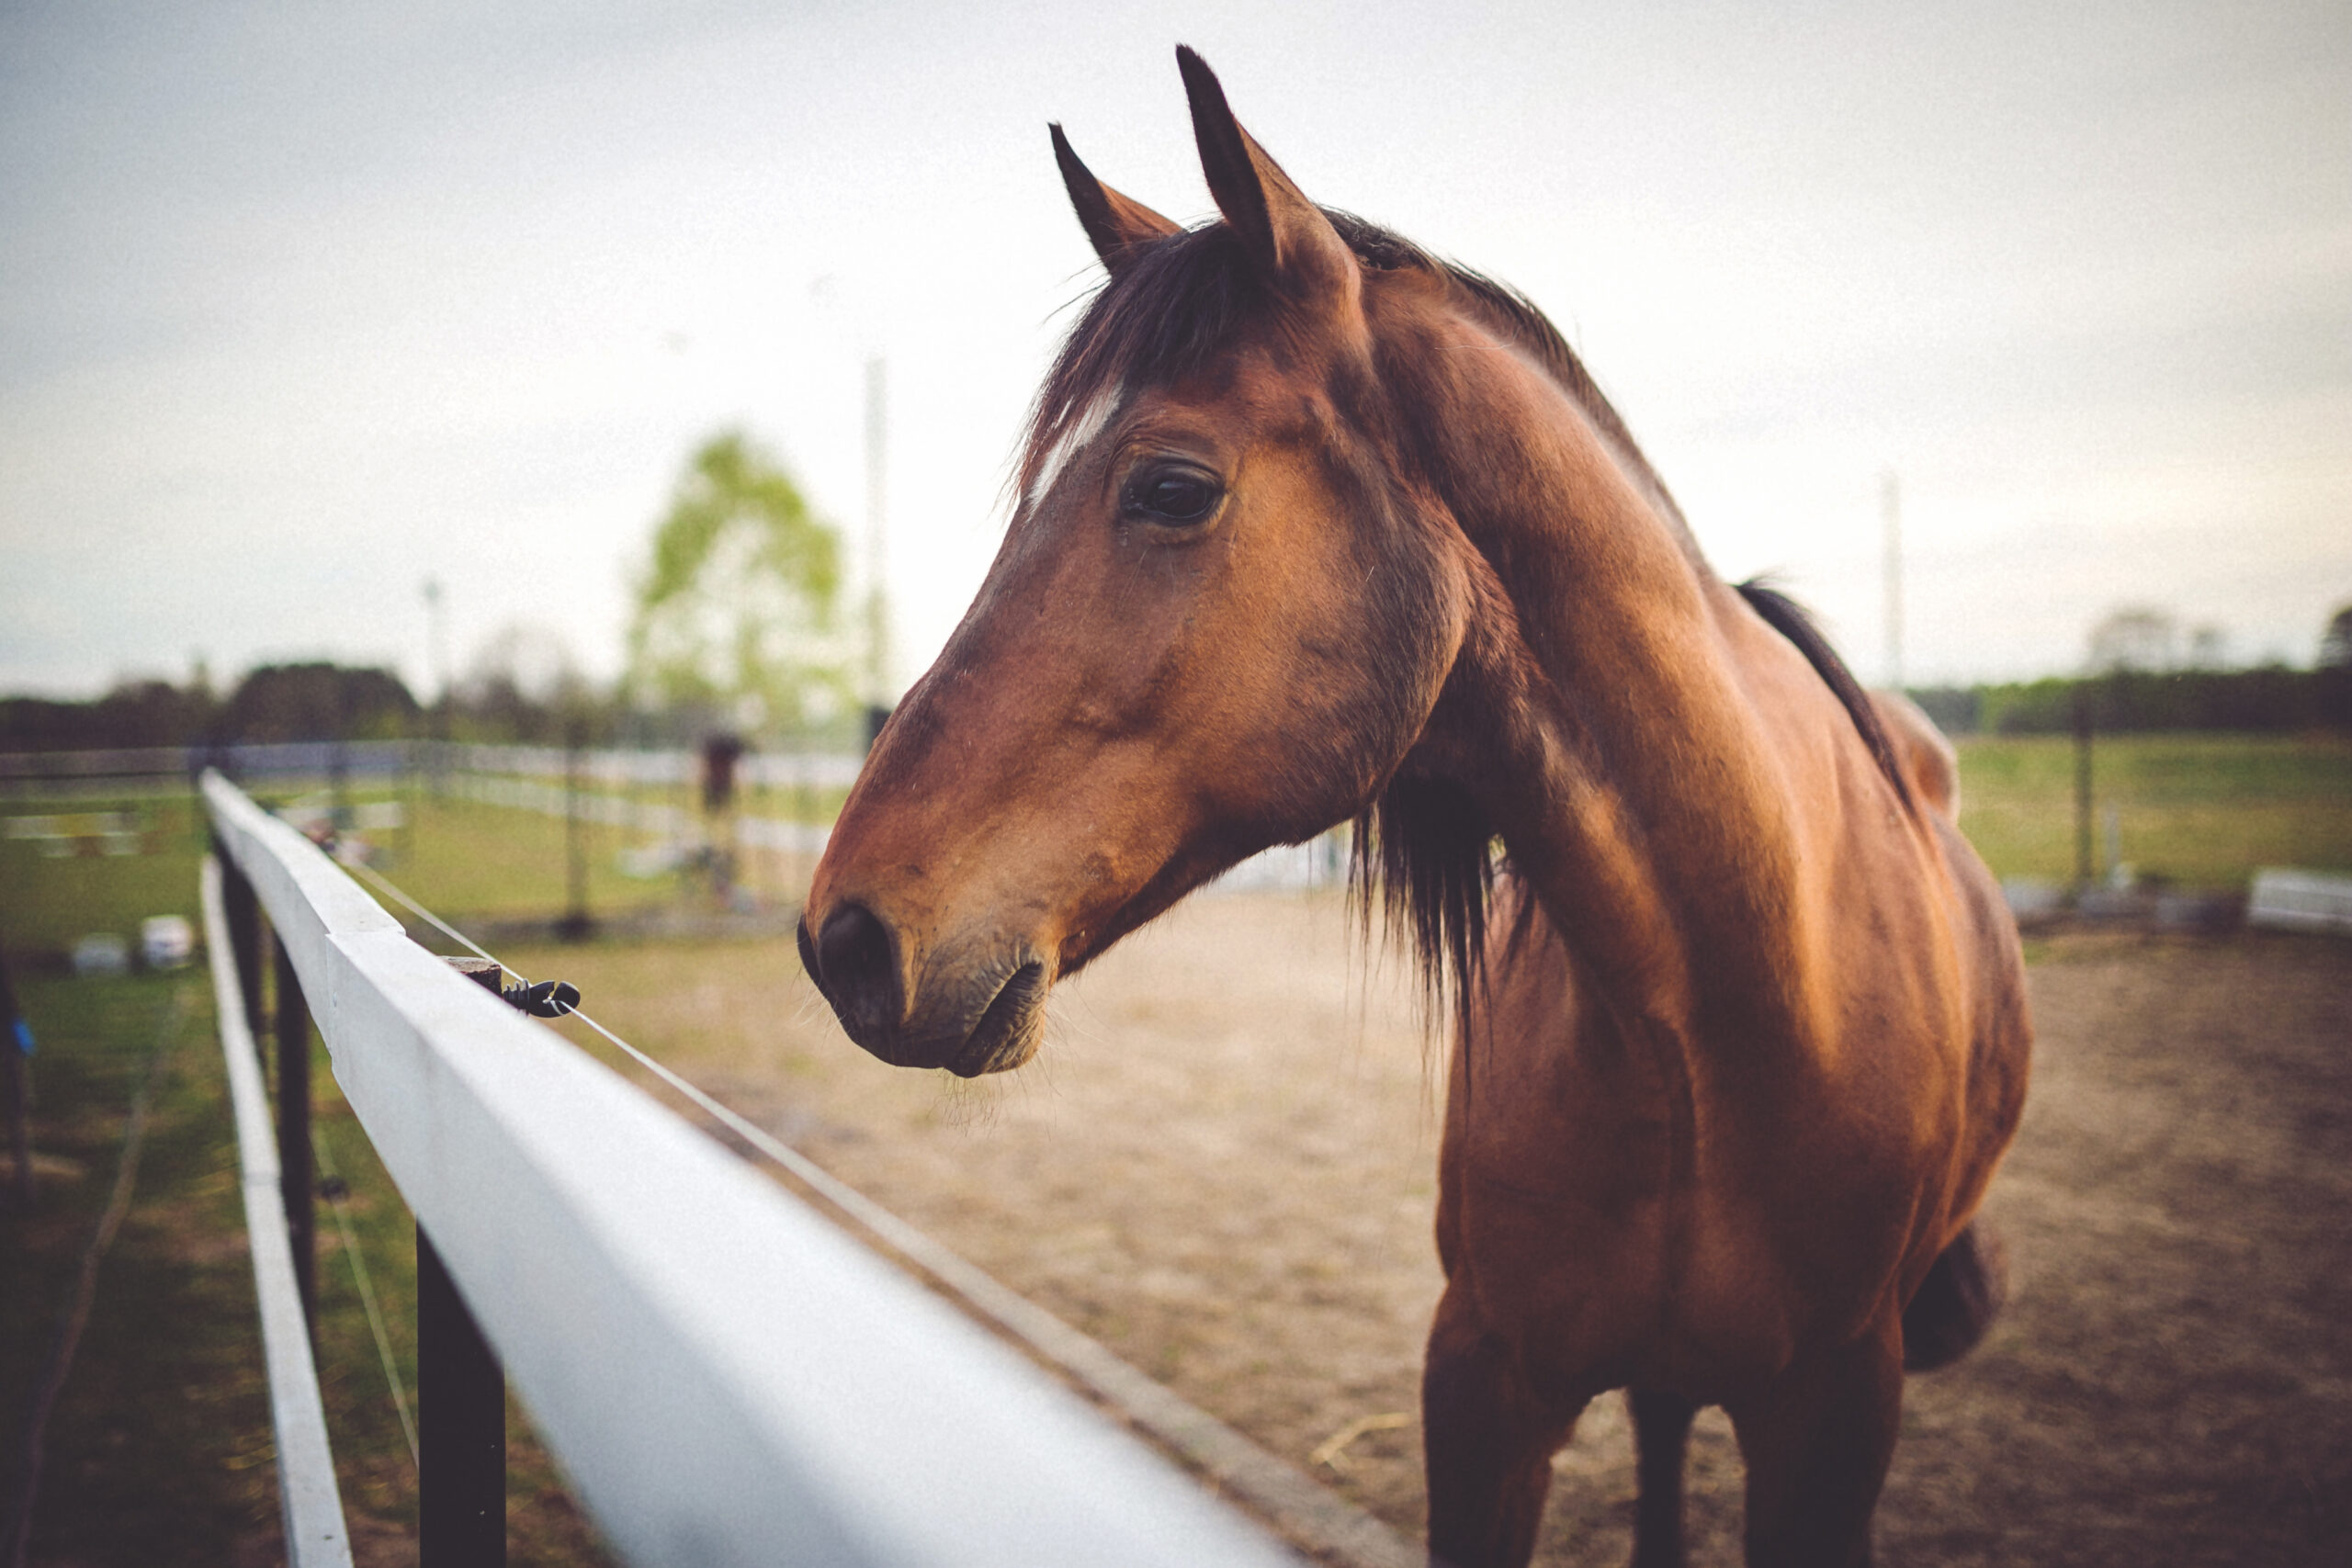 Image of a horse standing by a fence